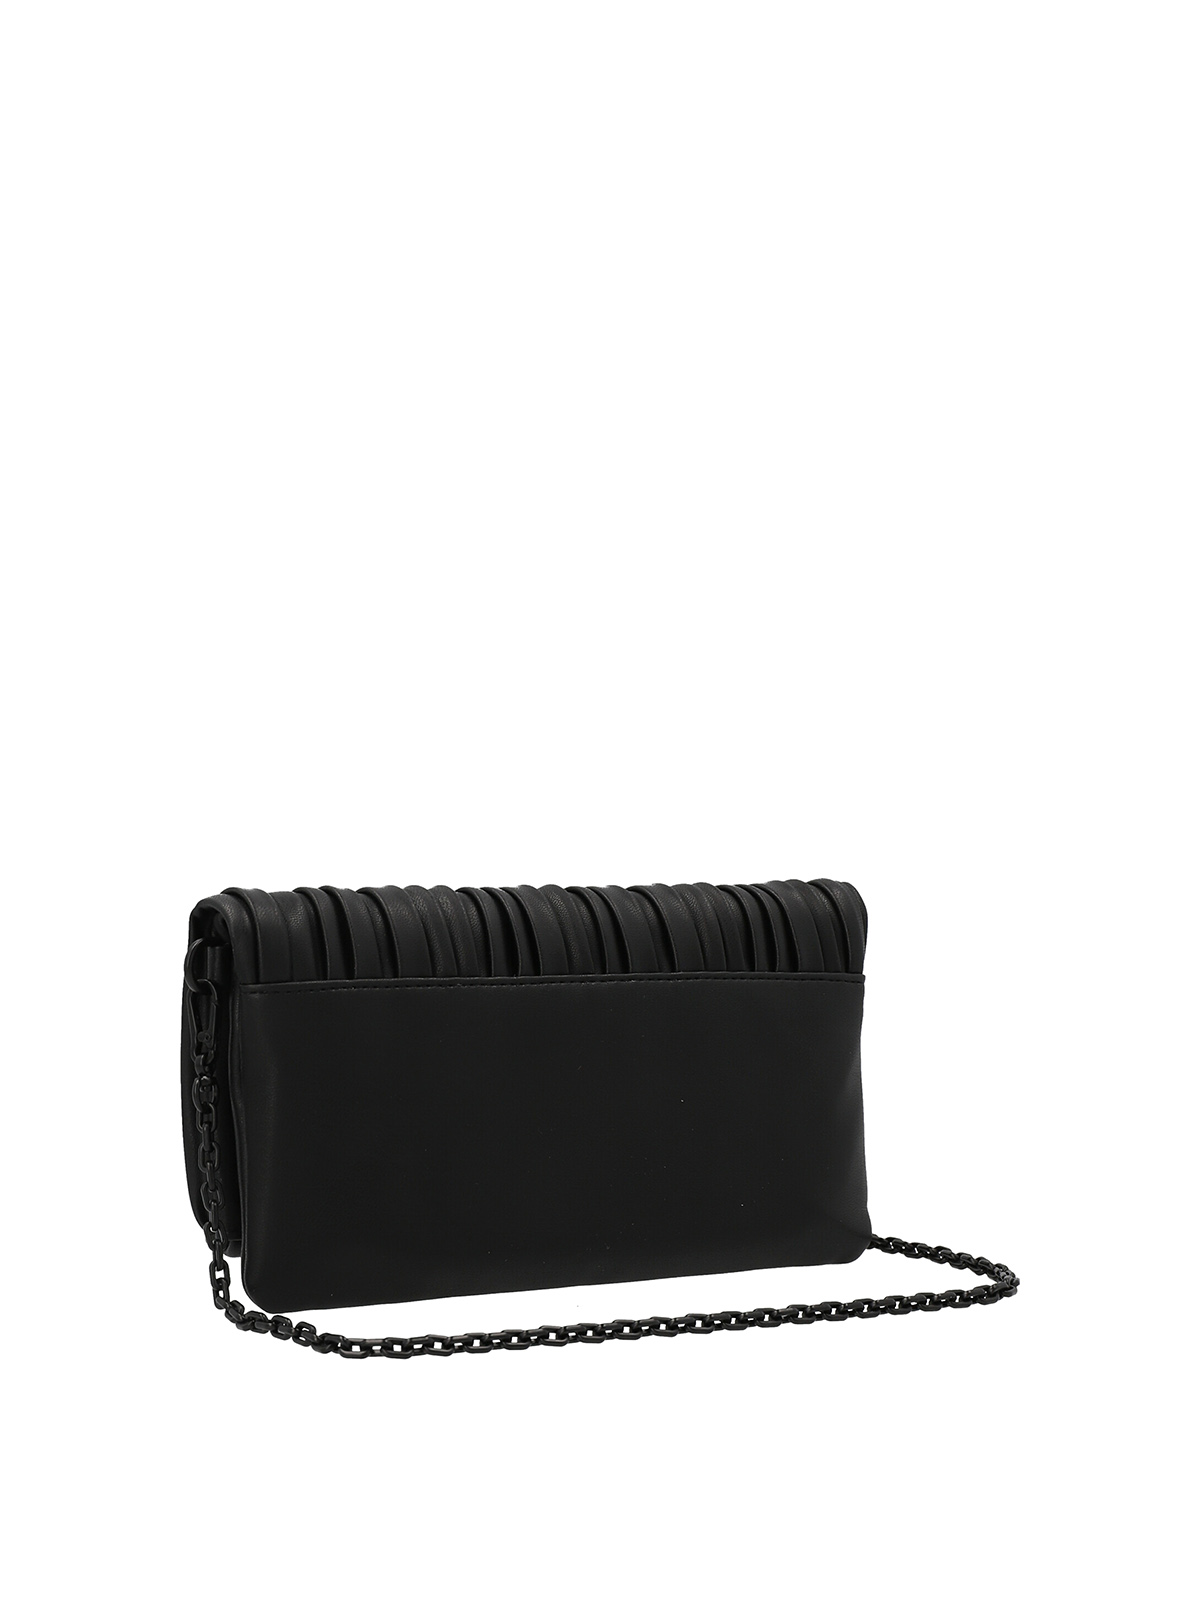 Karl Lagerfeld Shoulder Bag Womens Black Chain Wallet Clutch and Card Case